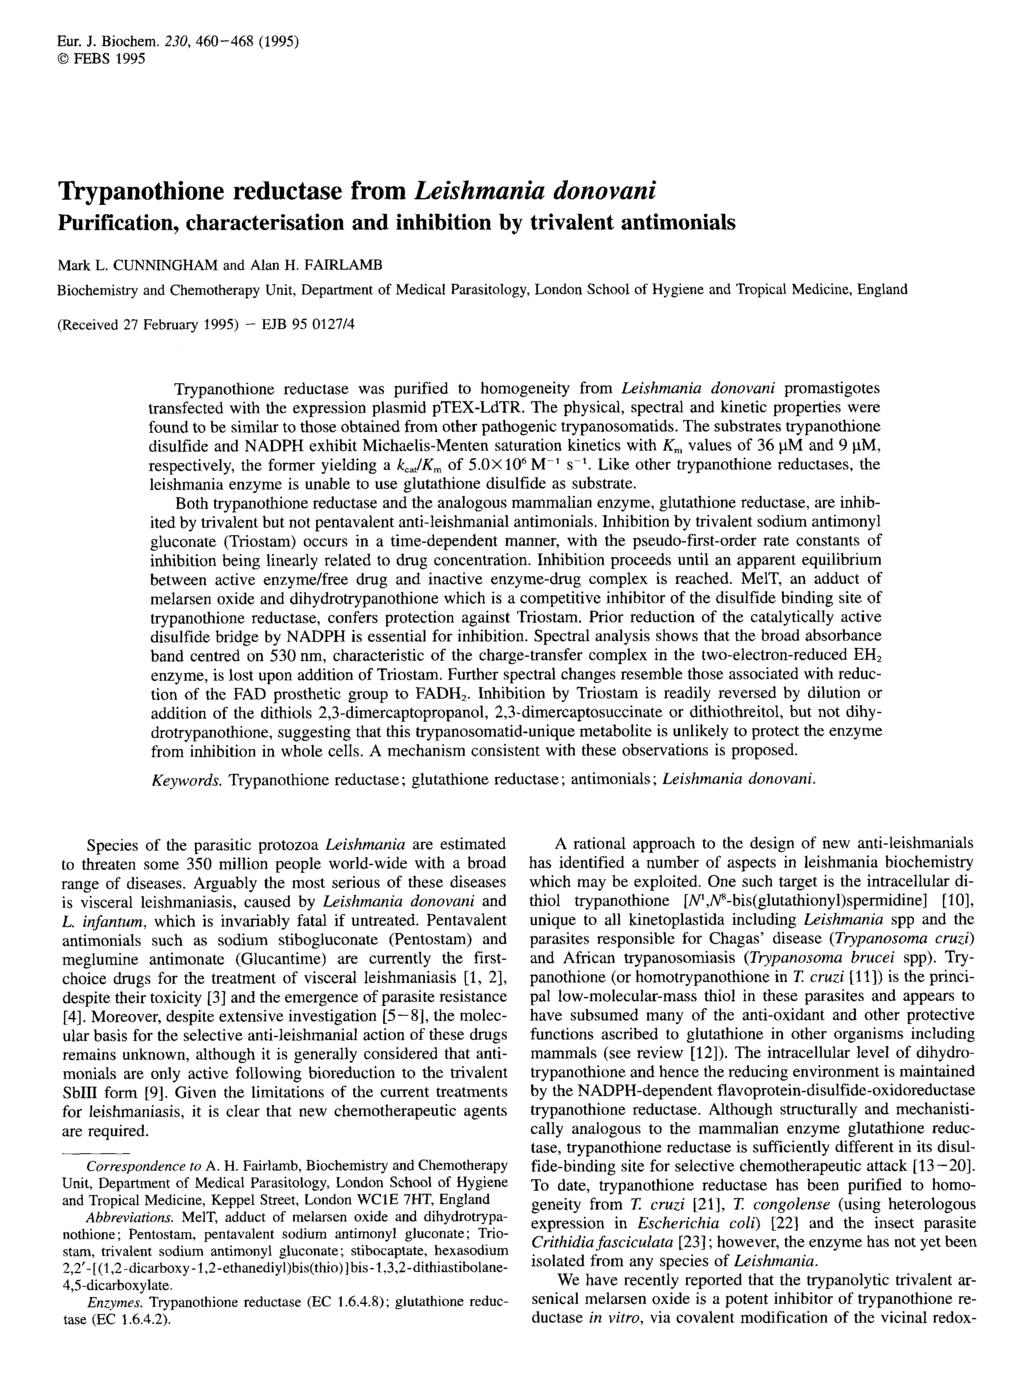 Eur. J. Biocem. 230,460468 (1995) 0 FEBS 1995 Trypanotione reductase from Leismania donovani Purification, caracterisation and inibition by trivalent antimonials Mark L. CUNNINGHAM and Alan H.